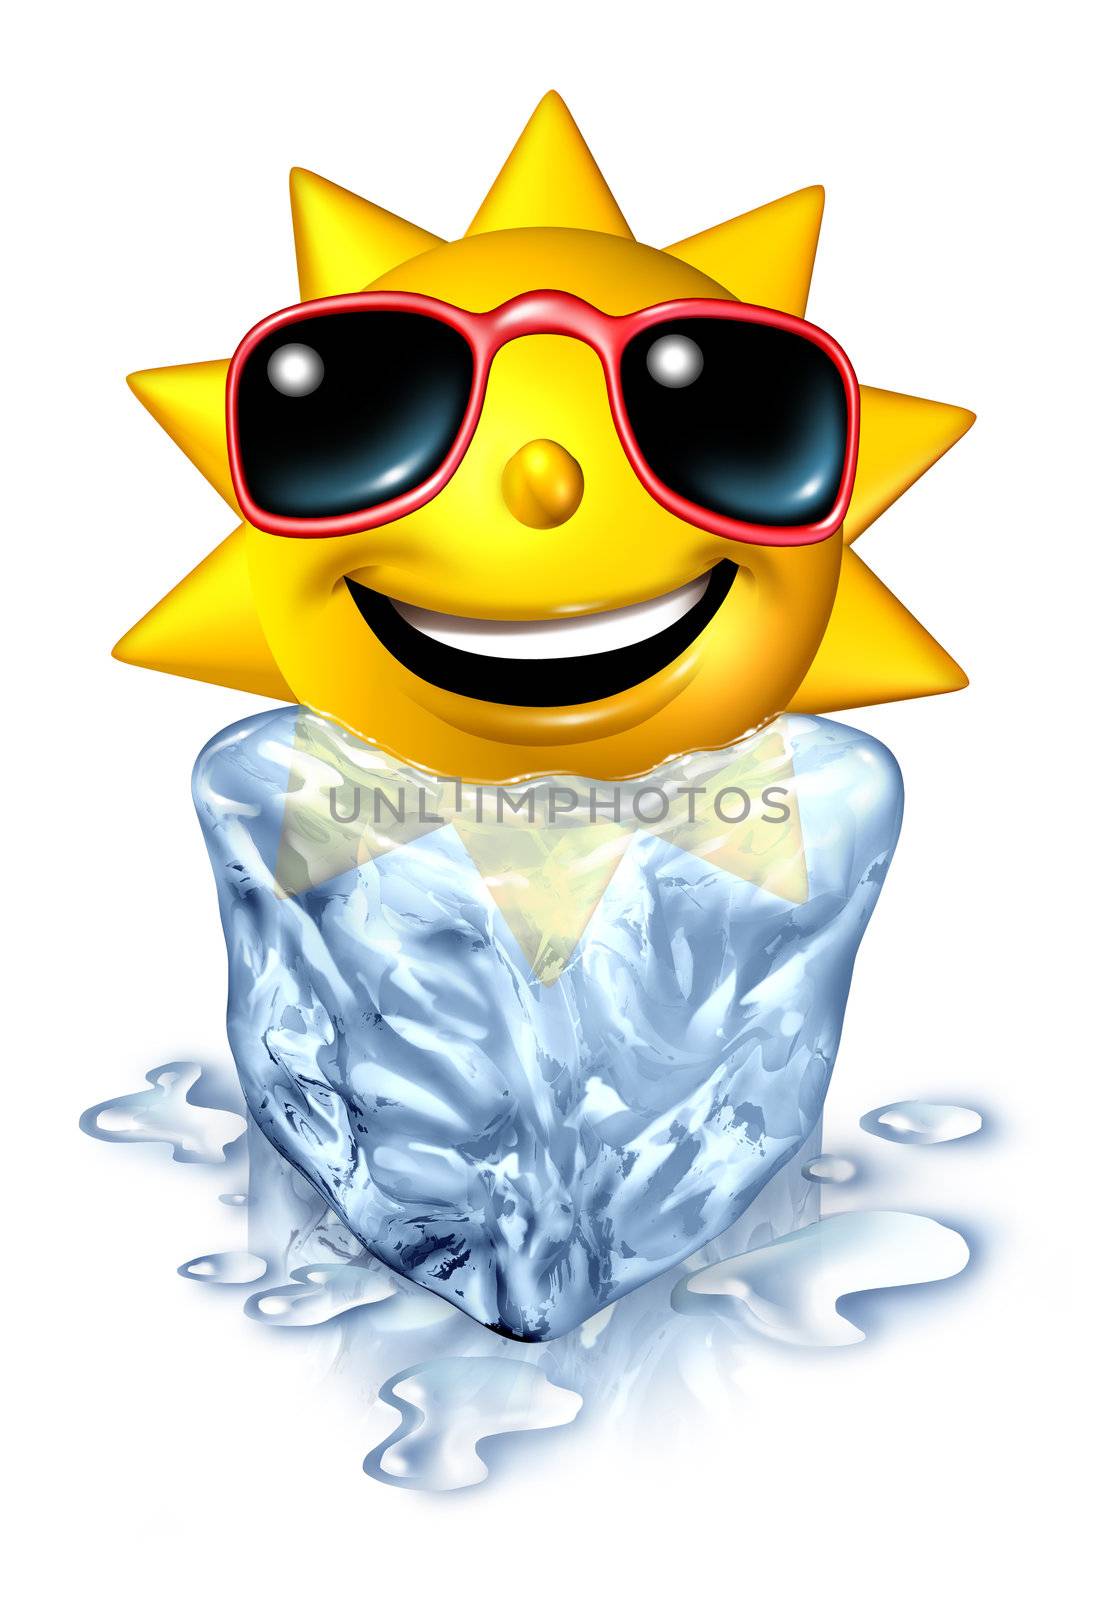 Cool down refreshment relief concept with a hot vacation summer sun character in a frozen cold block of ice melting as a chilled conforting relaxation from the blistering heat on white.